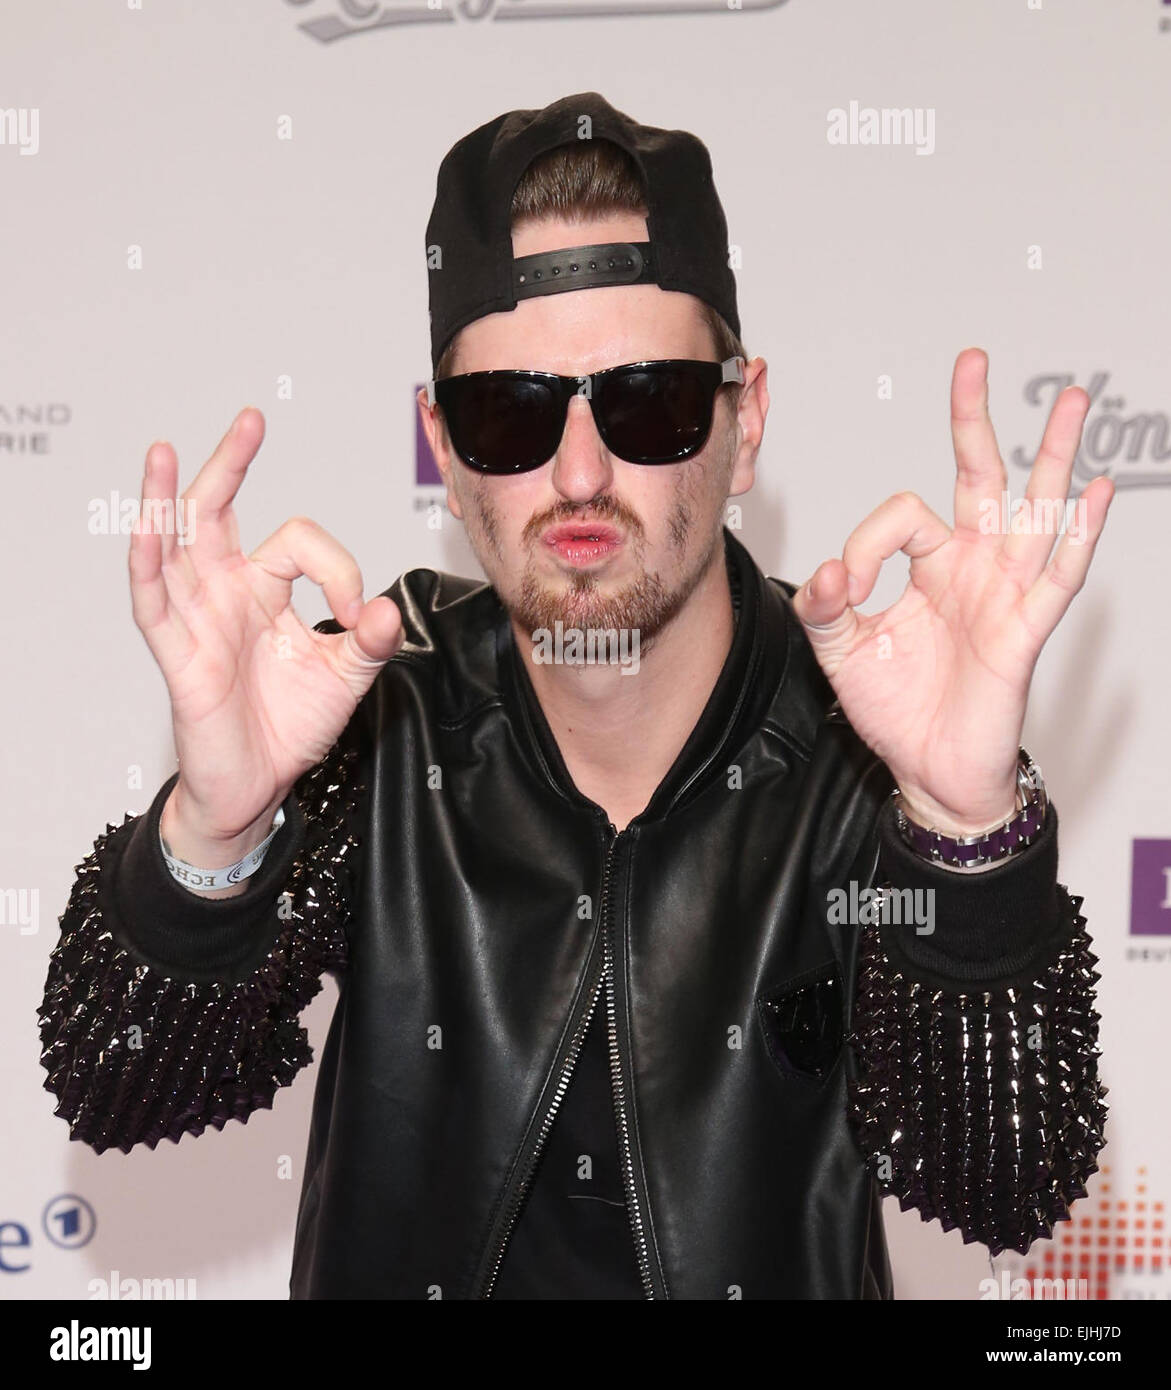 Robin schulz hi-res stock photography and images - Alamy